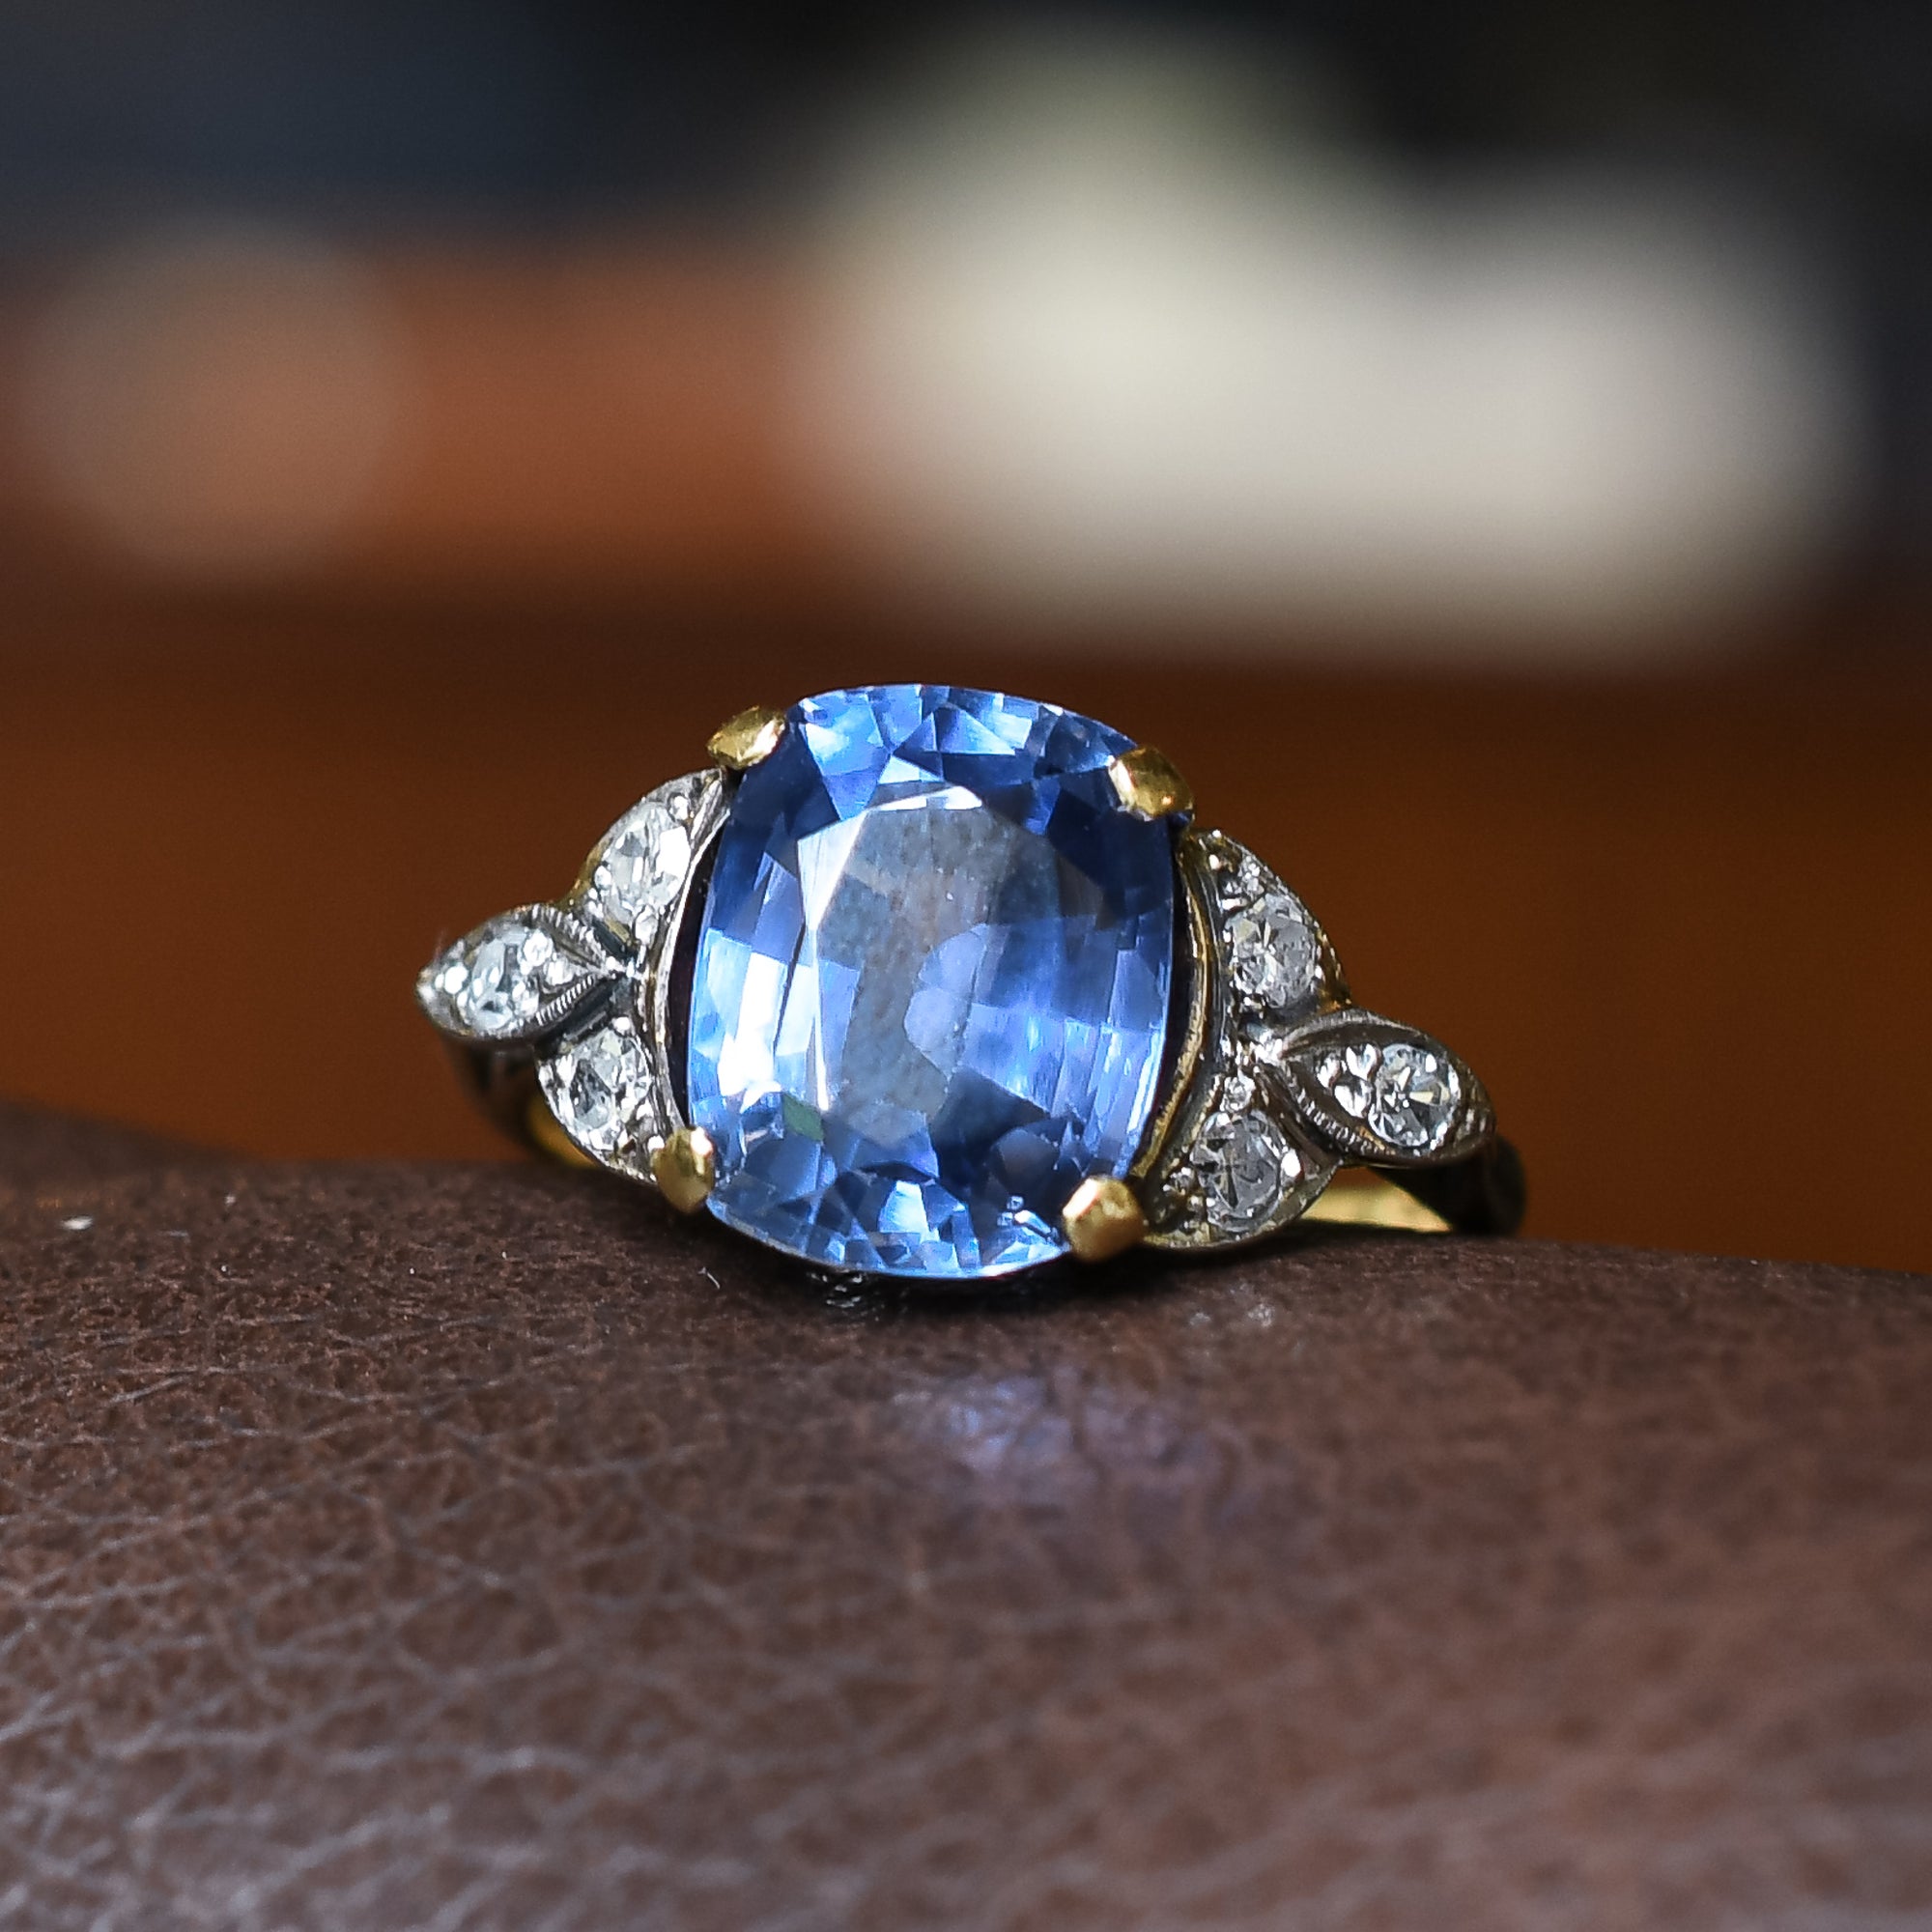 Art Deco 18ct White Gold, Large Ceylon Sapphire Ring with Old Mine Cut  Stepped Shoulders (114S) | The Antique Jewellery Company